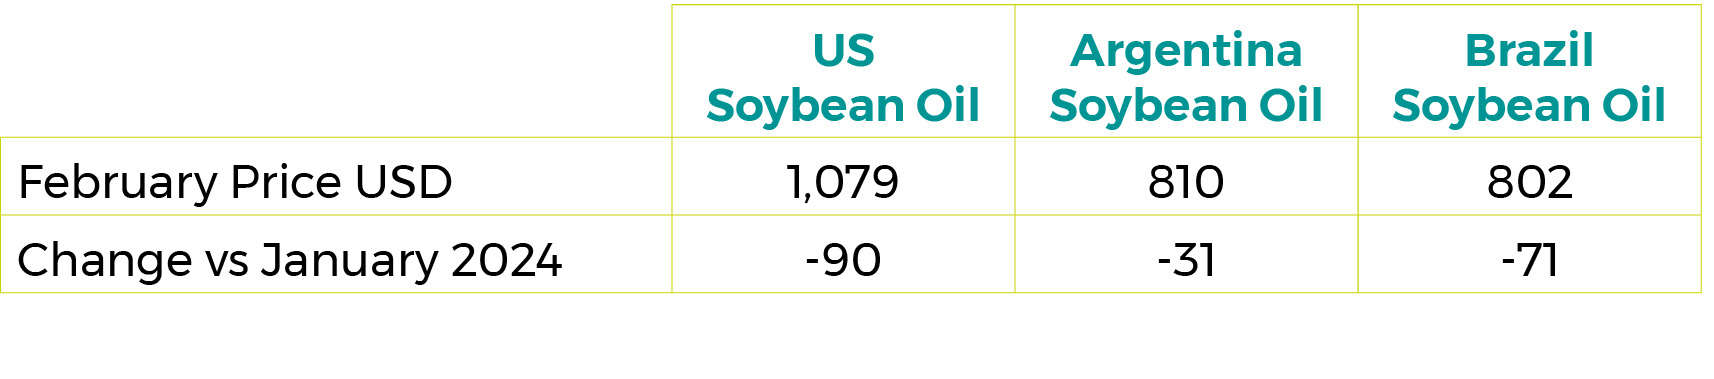 February 2024 Soybean Oil Export Prices $/tonne